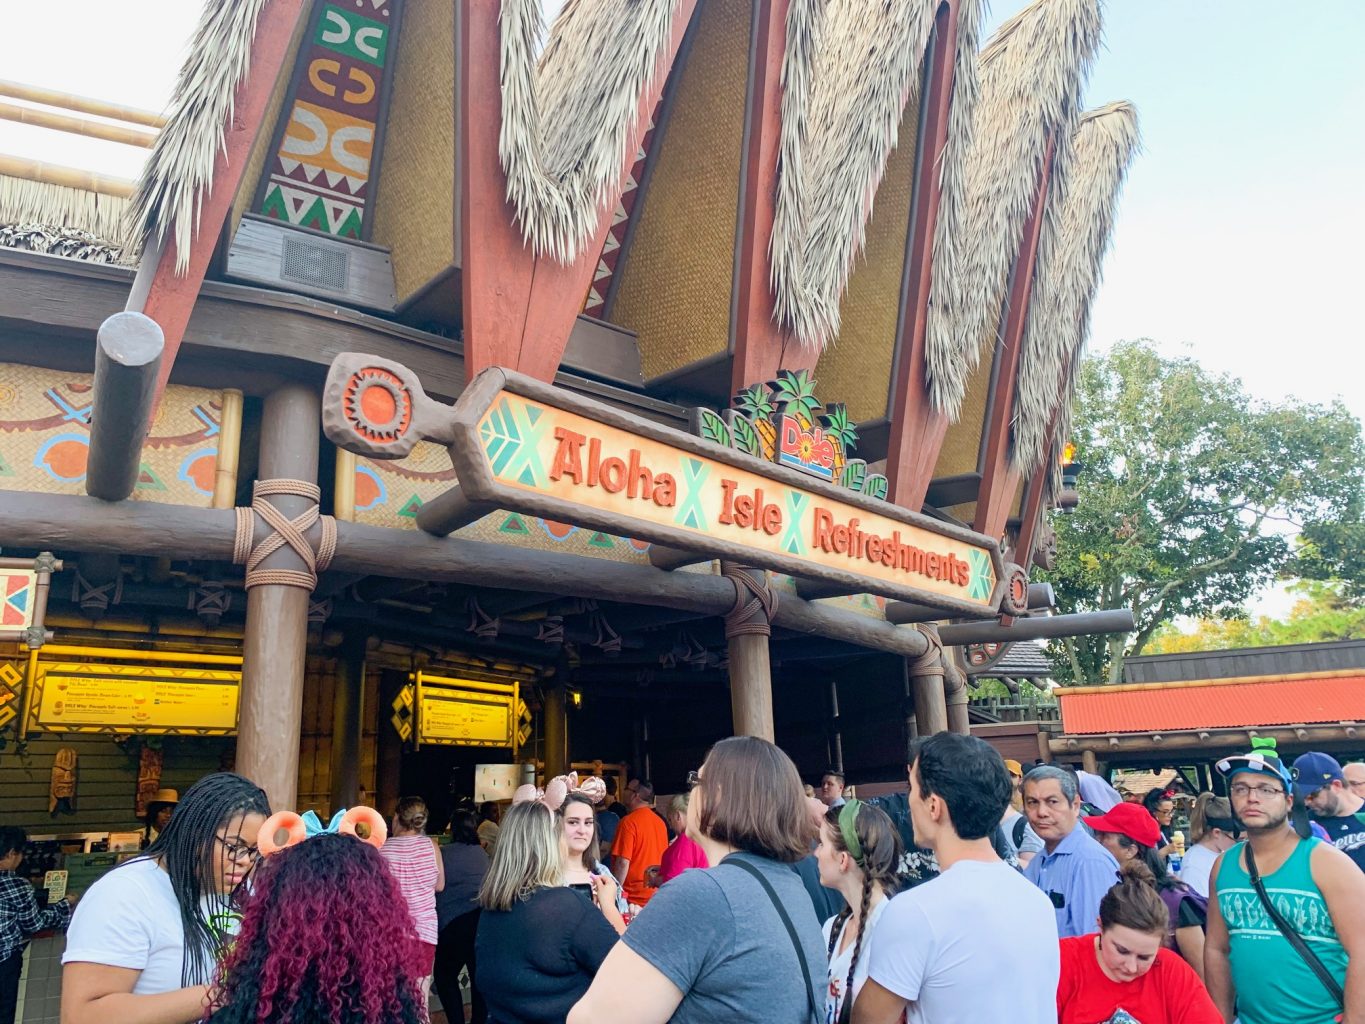 The Polynesian inspired exterior of Aloha Isles calls crowds for dole whip at one of the best Magic Kingdom Restaurants.